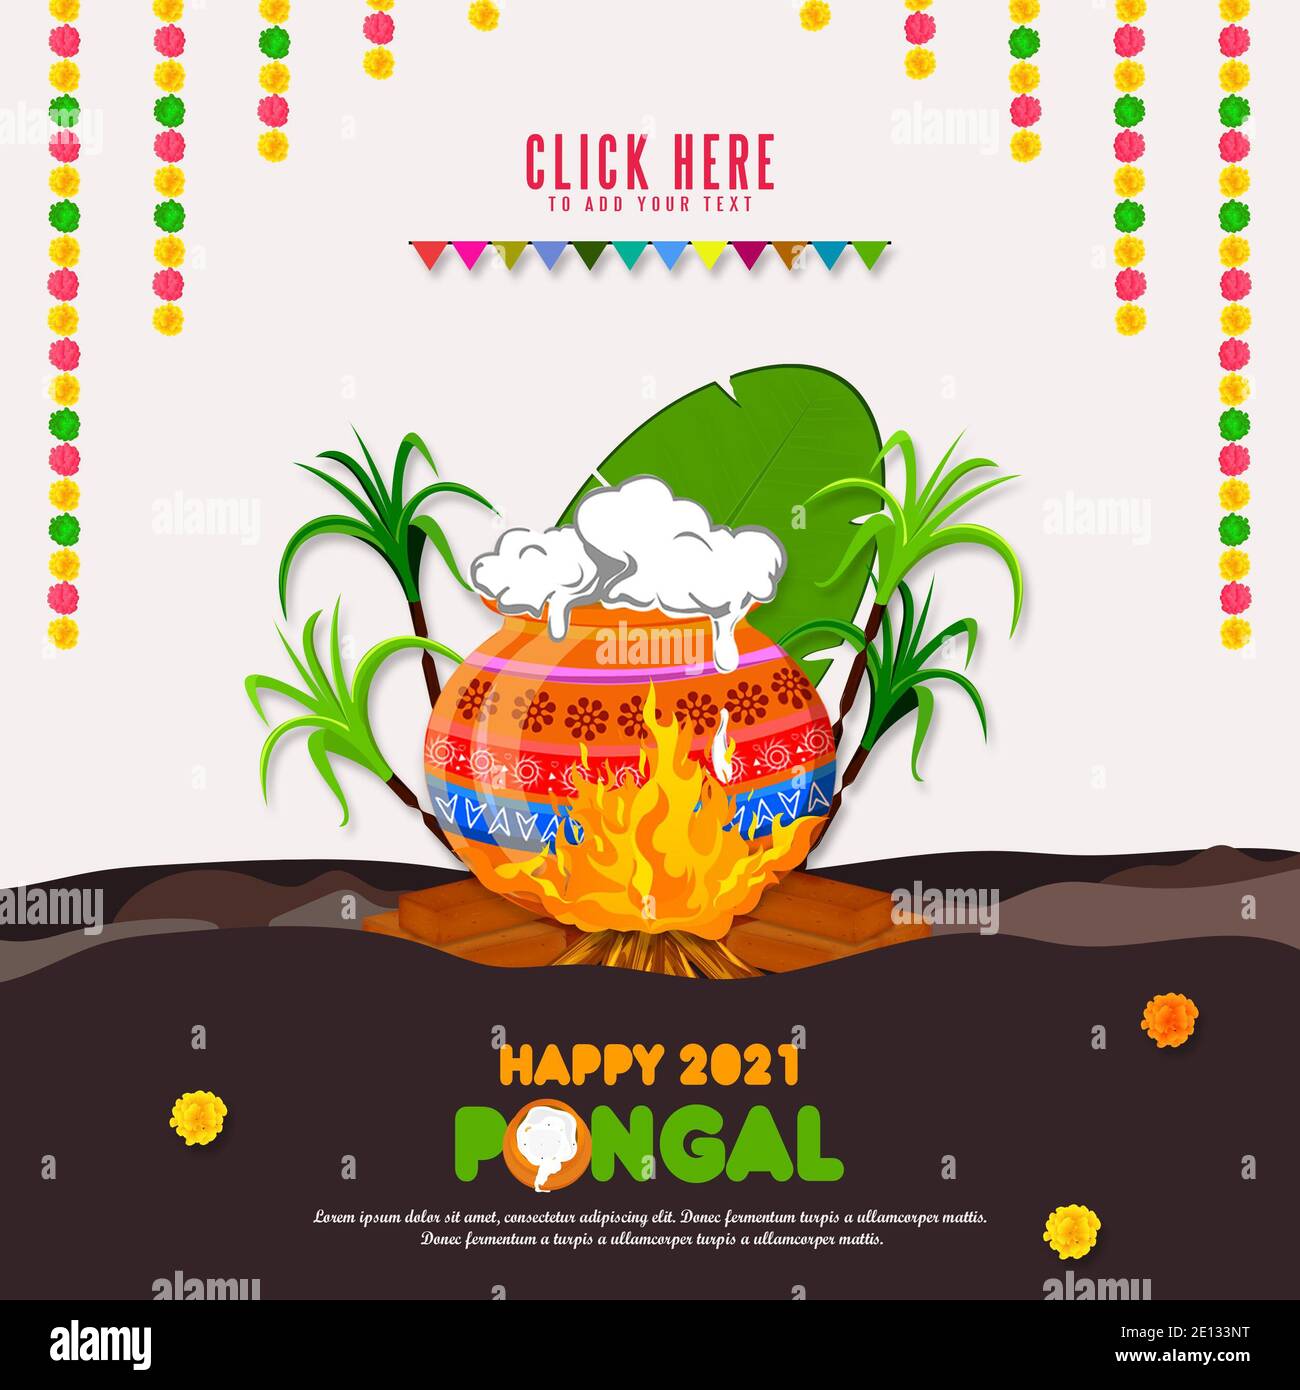 South Indian Festival Happy Pongal Template Design, Pongal Festival  Background Stock Photo - Alamy